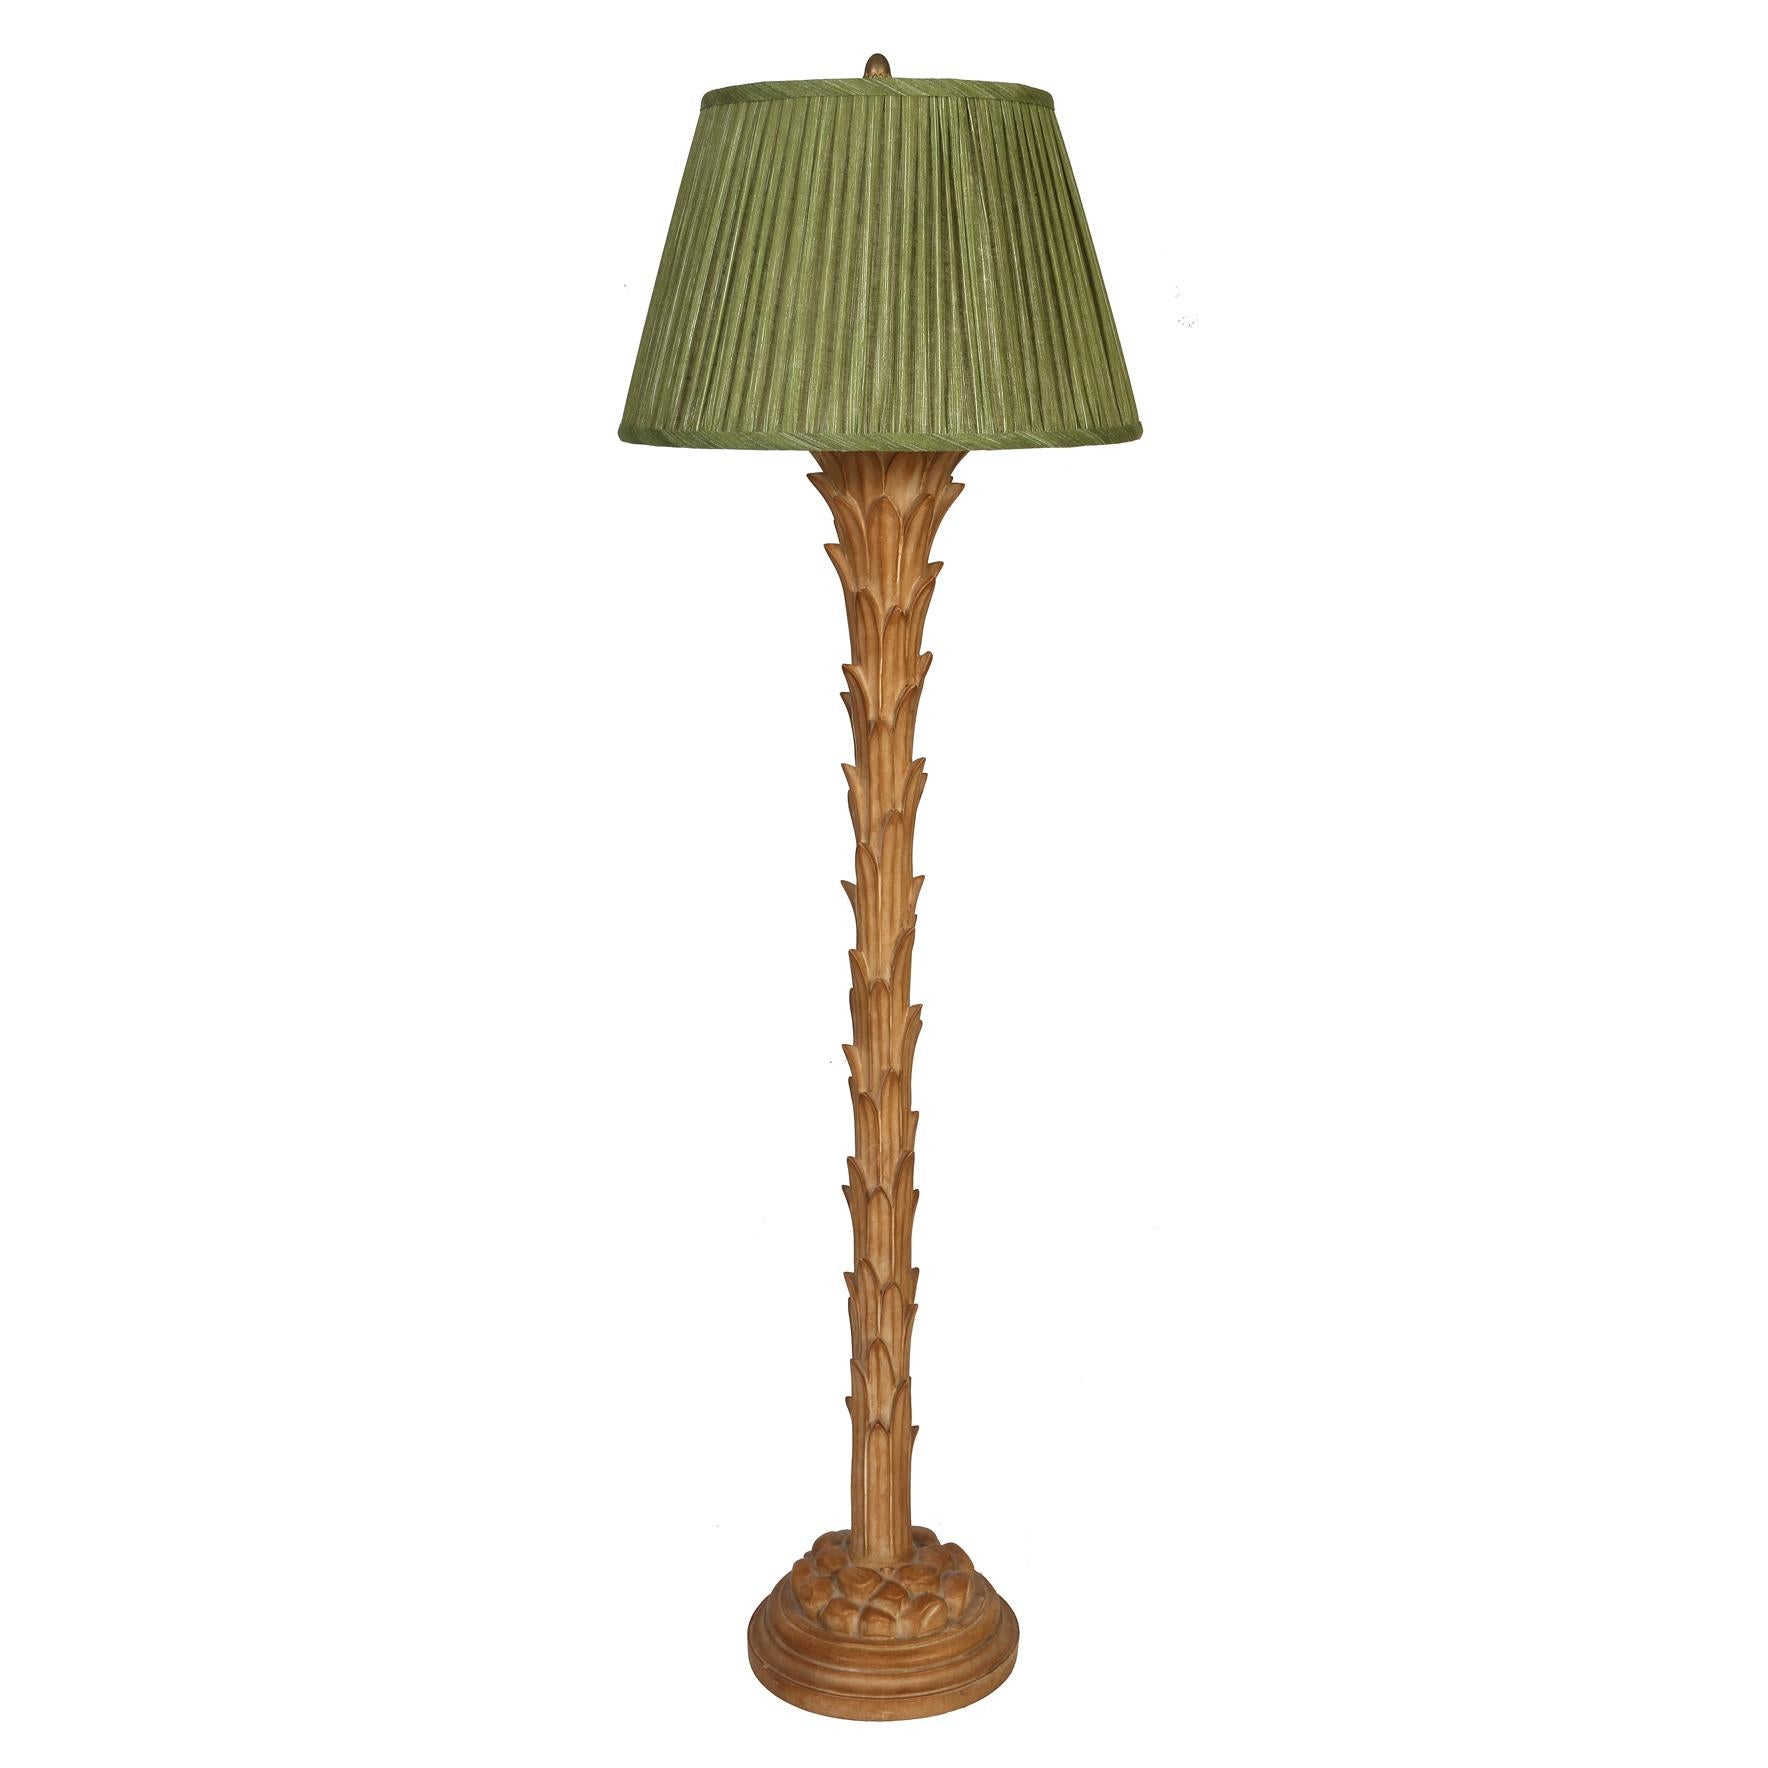 A vintage Serge Roche style palm leaf floor lamp. The standing palm leaf lamp channels the spirit of Roche's distinctive designs, blending opulence and whimsy in perfect harmony. Here the neutral toned floor lamp column  takes on the form of palm